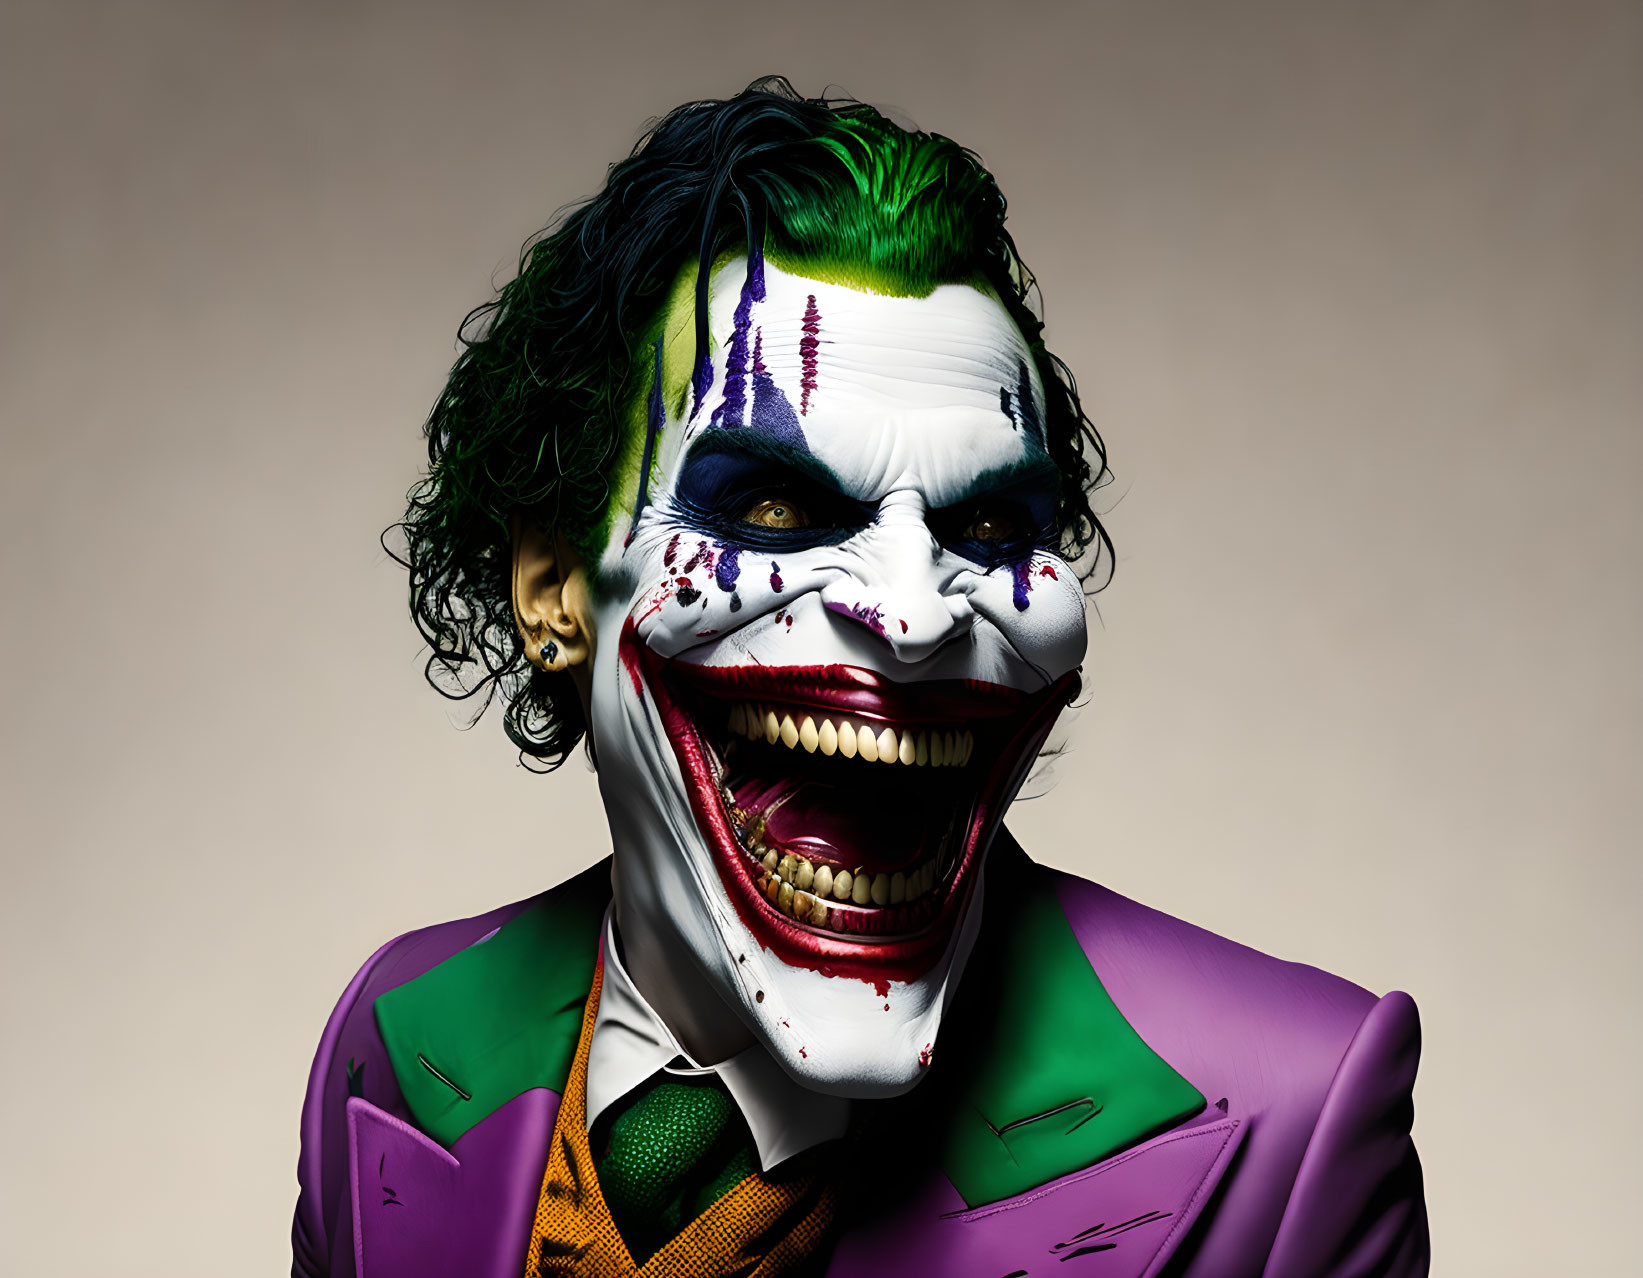 Detailed Joker makeup and costume with green hair, white face paint, red smile, purple jacket